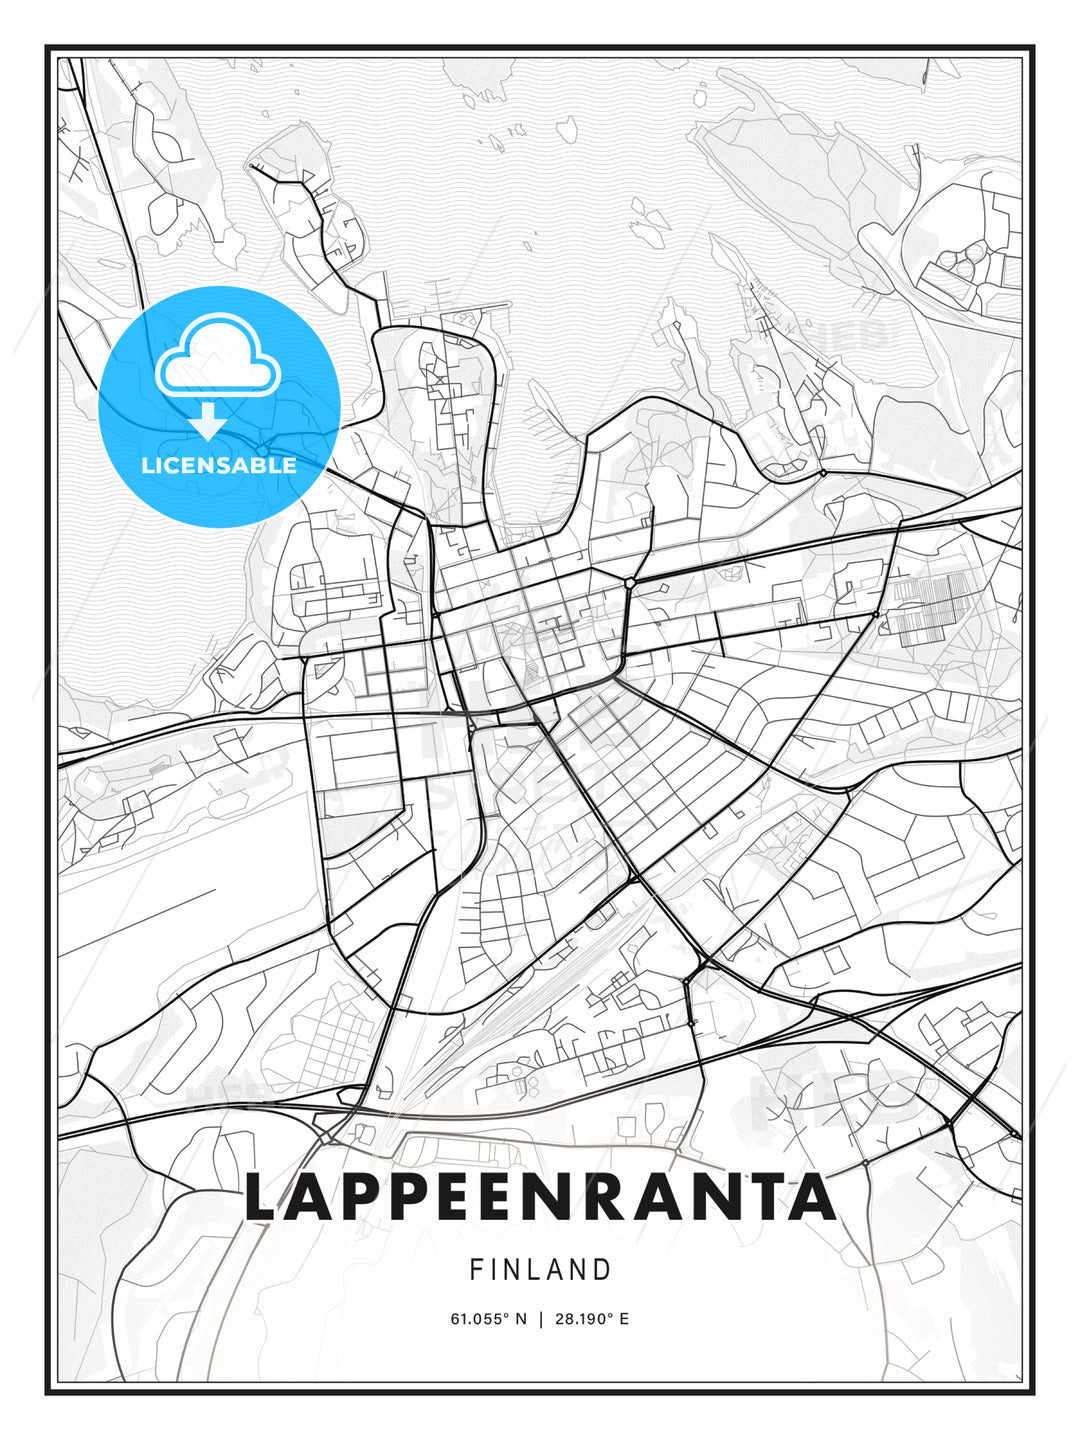 Lappeenranta, Finland, Modern Print Template in Various Formats - HEBSTREITS Sketches